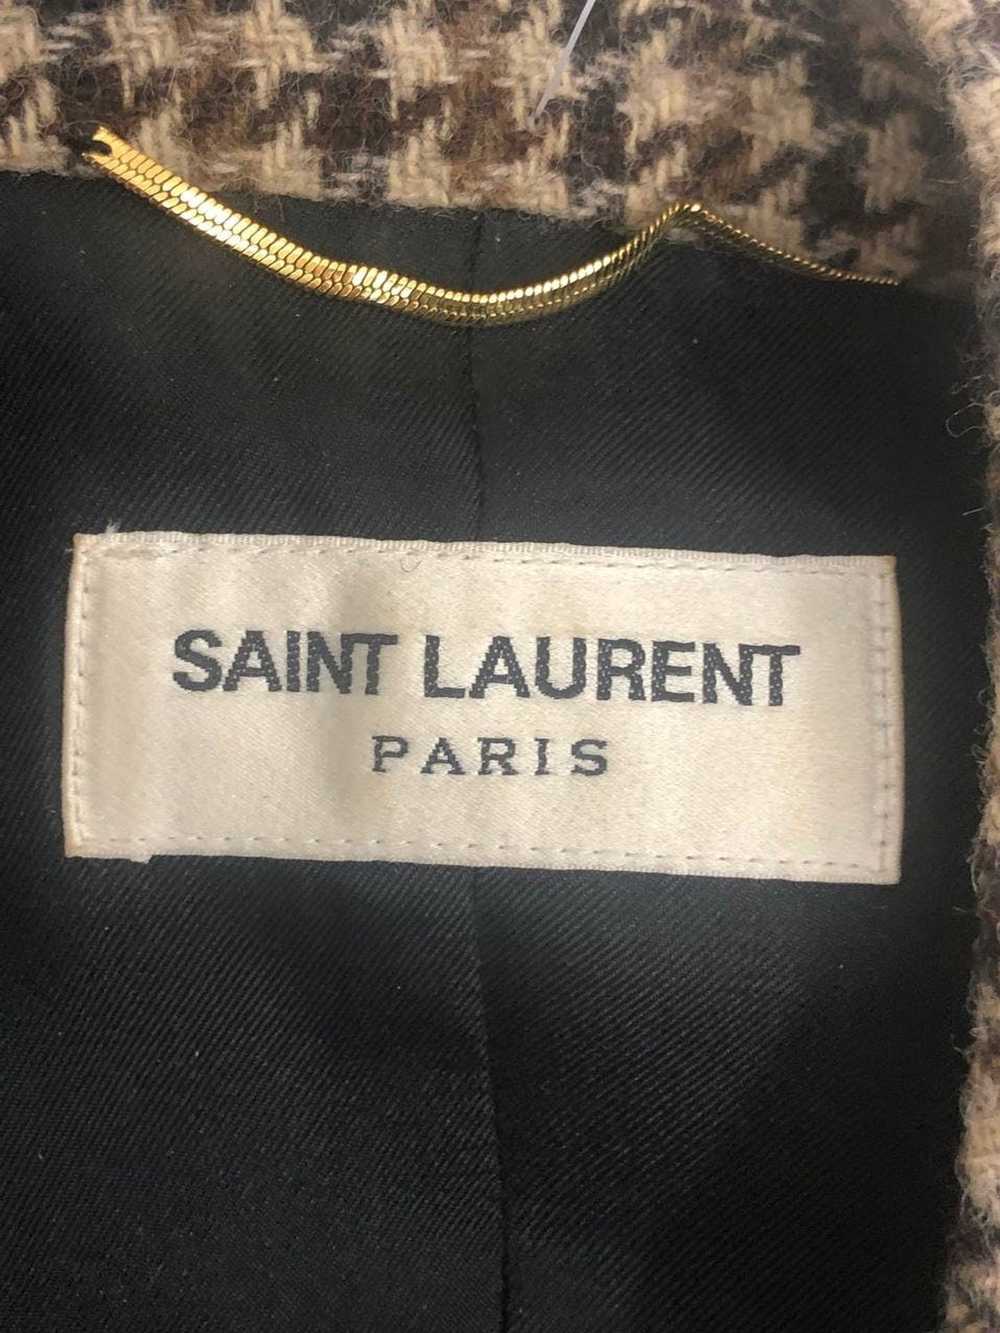 Yves Saint Laurent Jacket with a houndstooth print - image 6